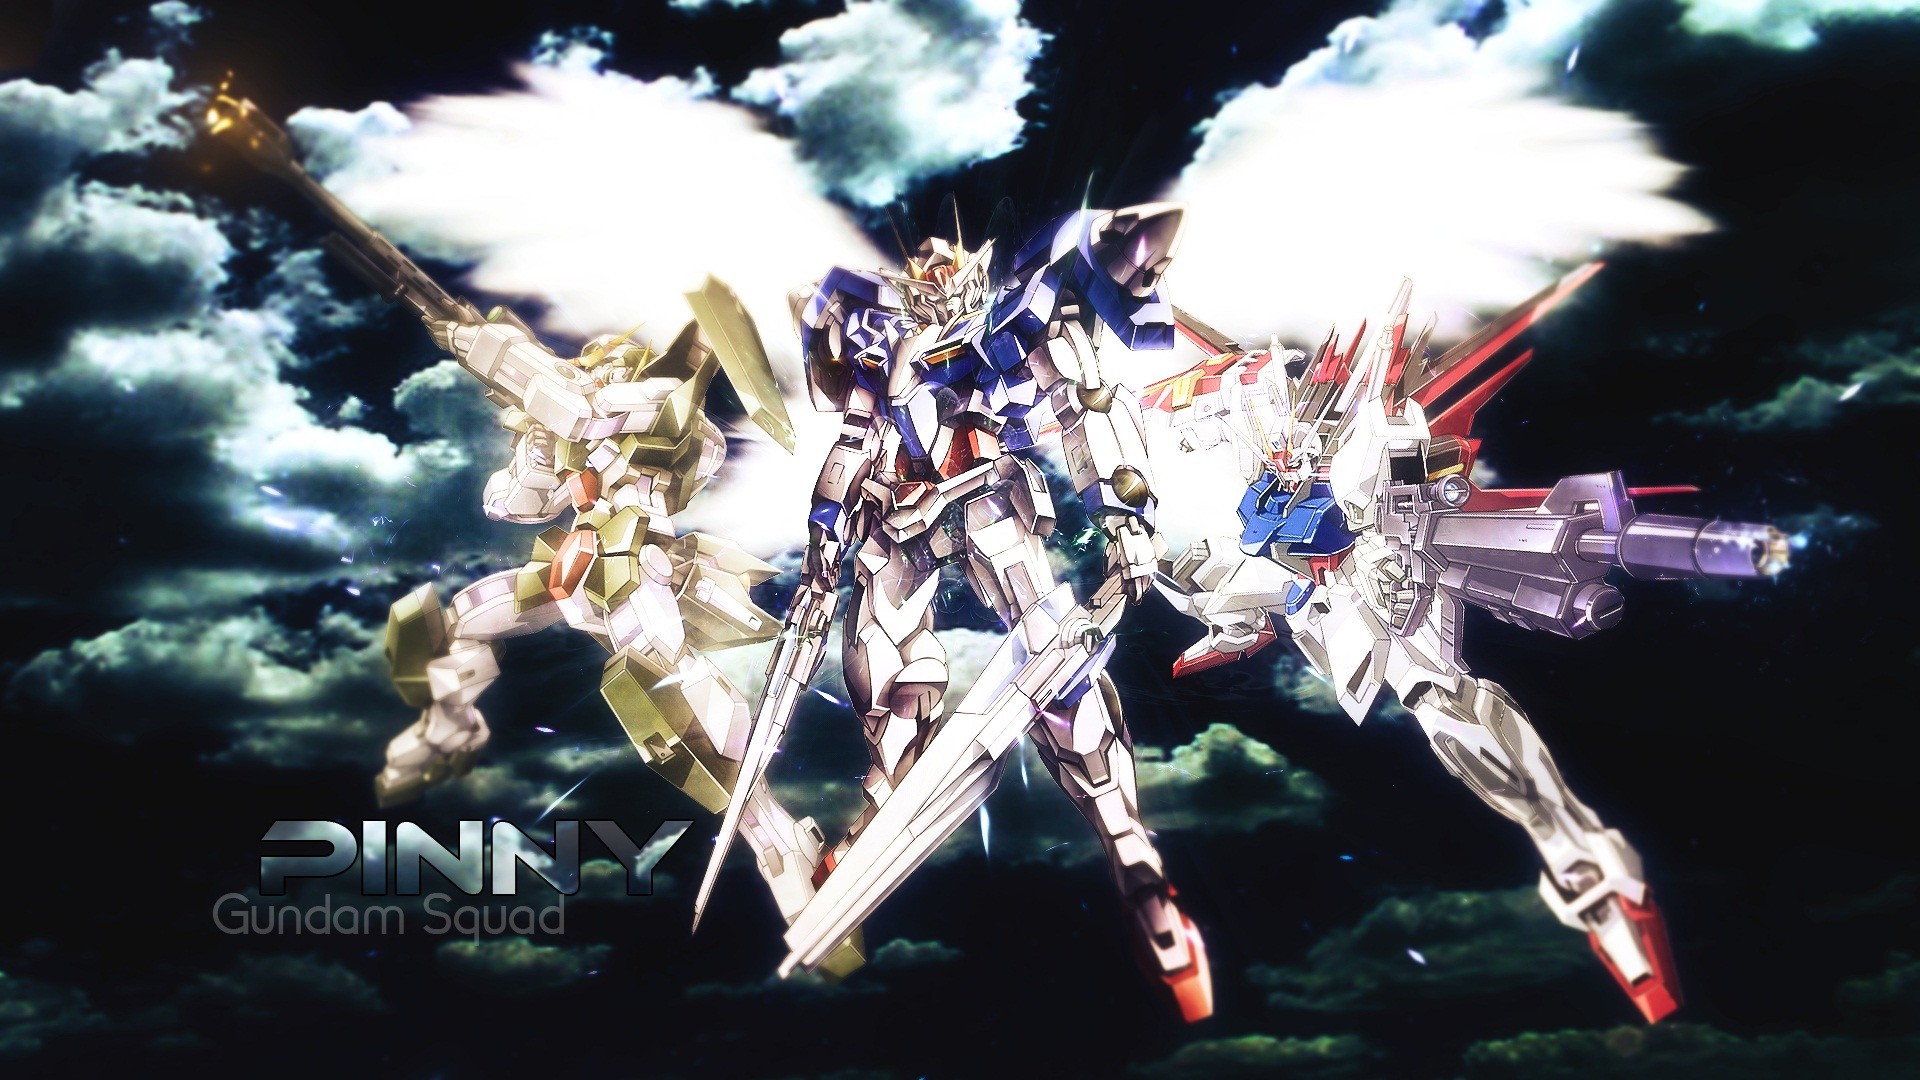 1920x1080 Tags: Anime, Mobile Suit Gundam Wing, HD Wallpaper, Fanmade Wallpaper,  Edited